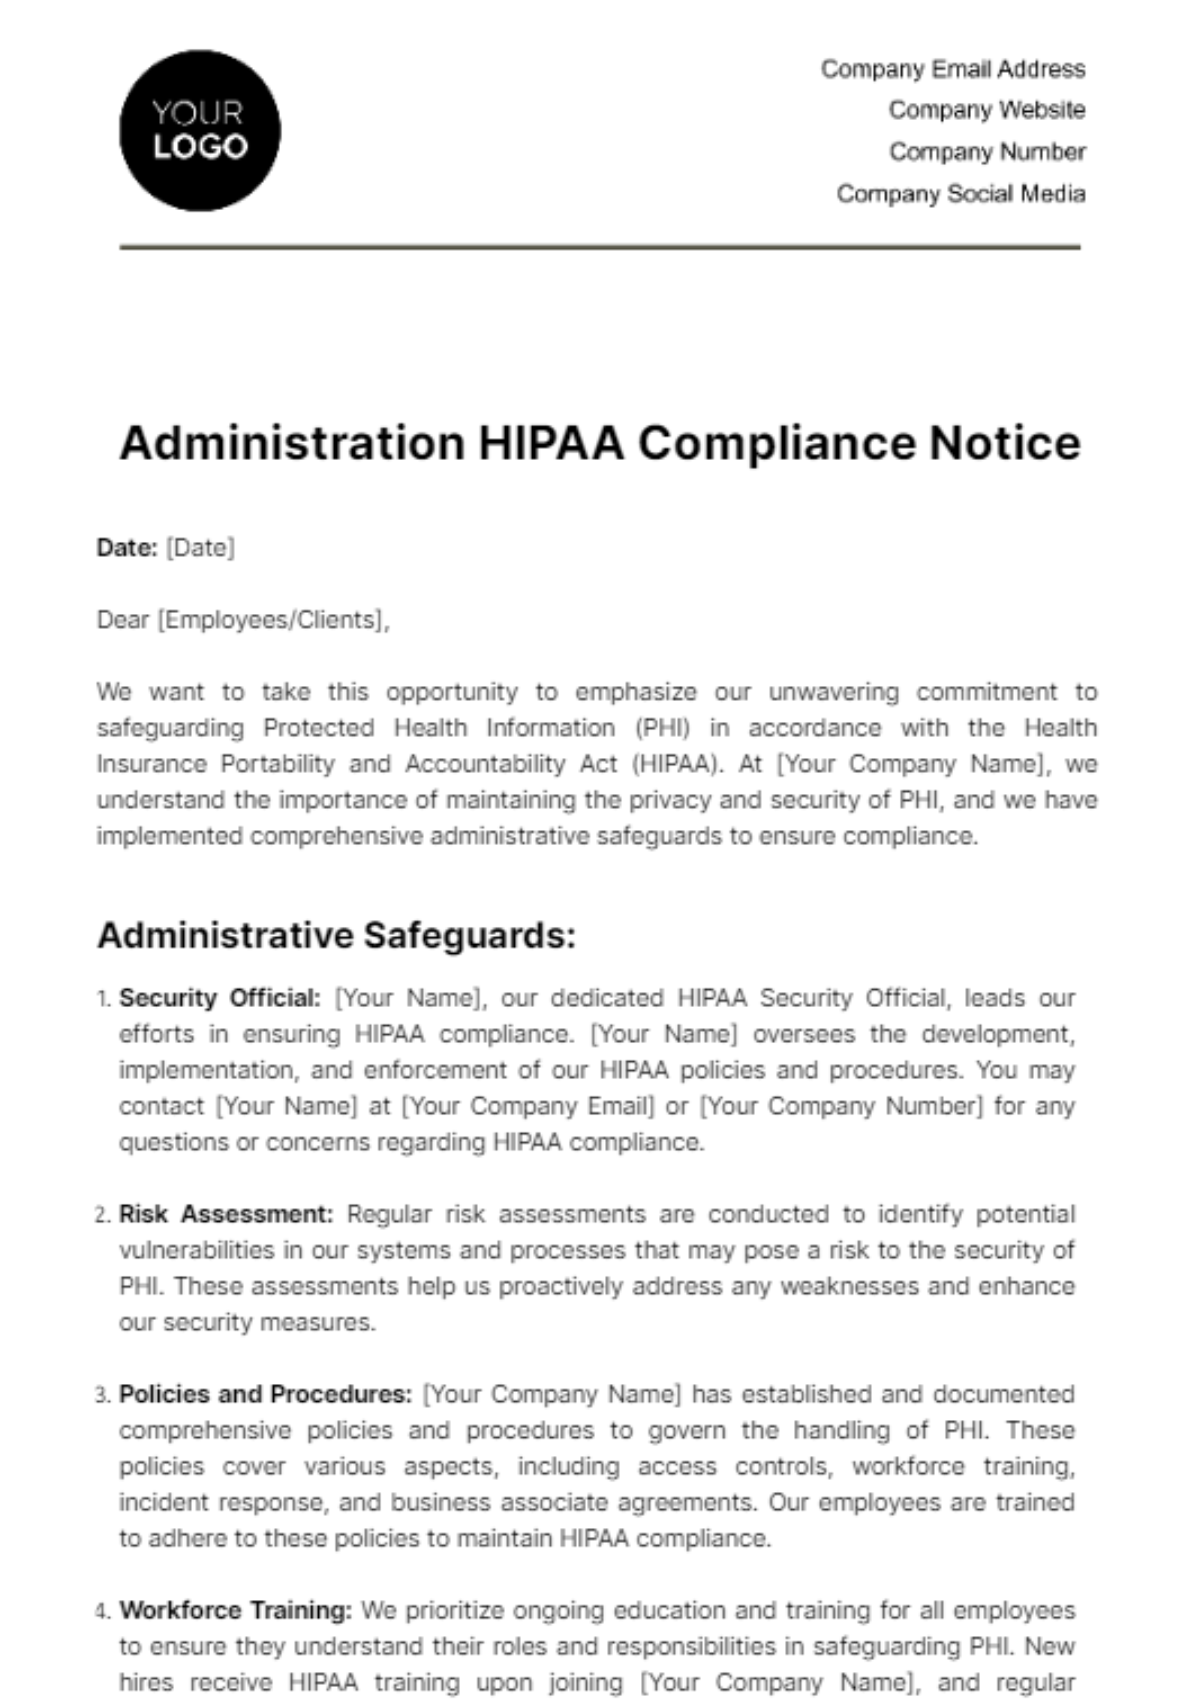 Free Administration HIPAA Compliance Notice Template